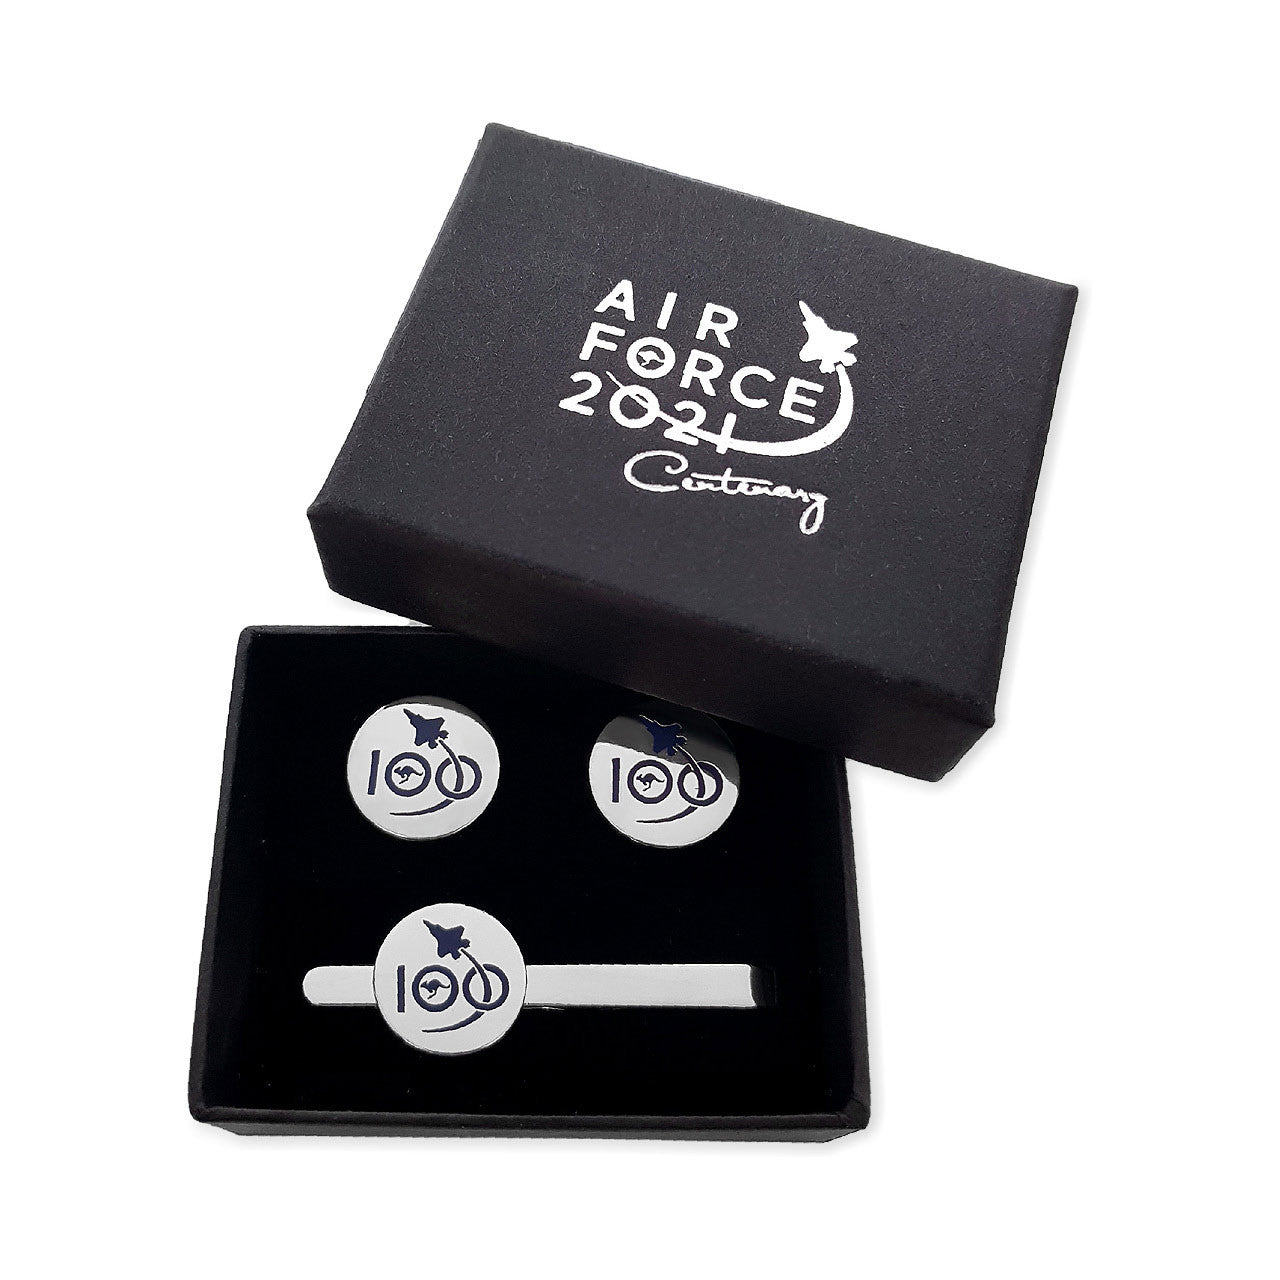 This beautiful and elegant tie bar and cuff link set is the perfect accessory for work or special functions. Designed to be both functional and stylish, the tie bar and cuff links feature the Air Force 100 logo www.defenceqstore.com.au